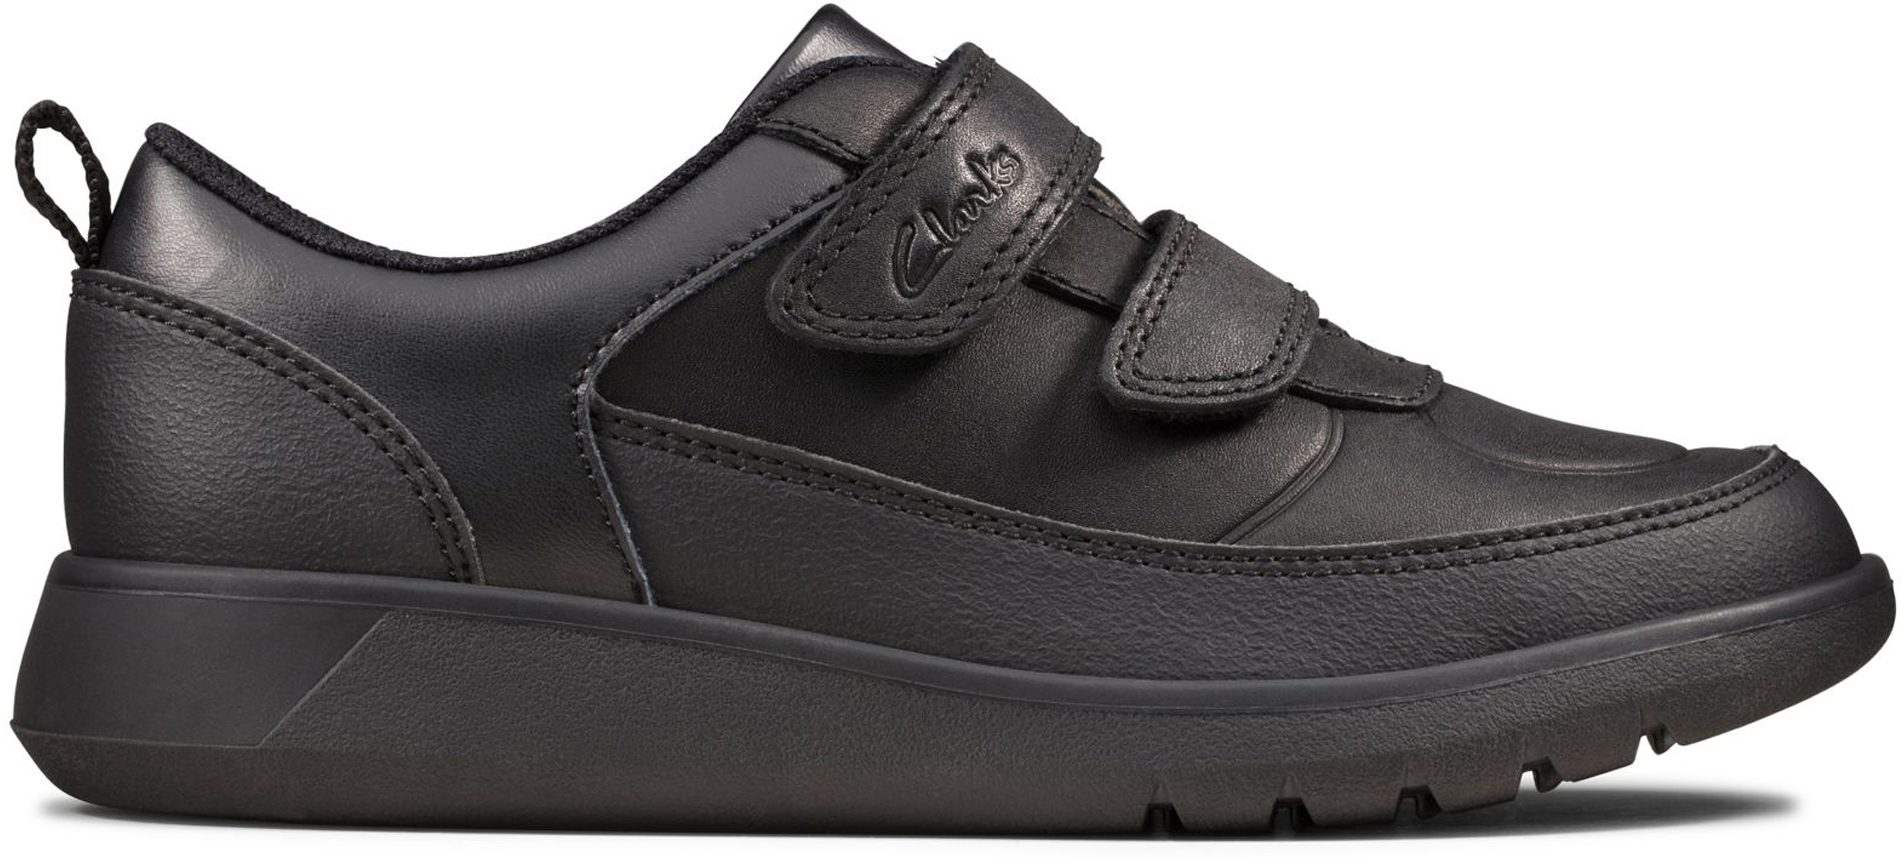 Clarks Scape Flare Kid Black Leather 26149401 - Boys School Shoes ...